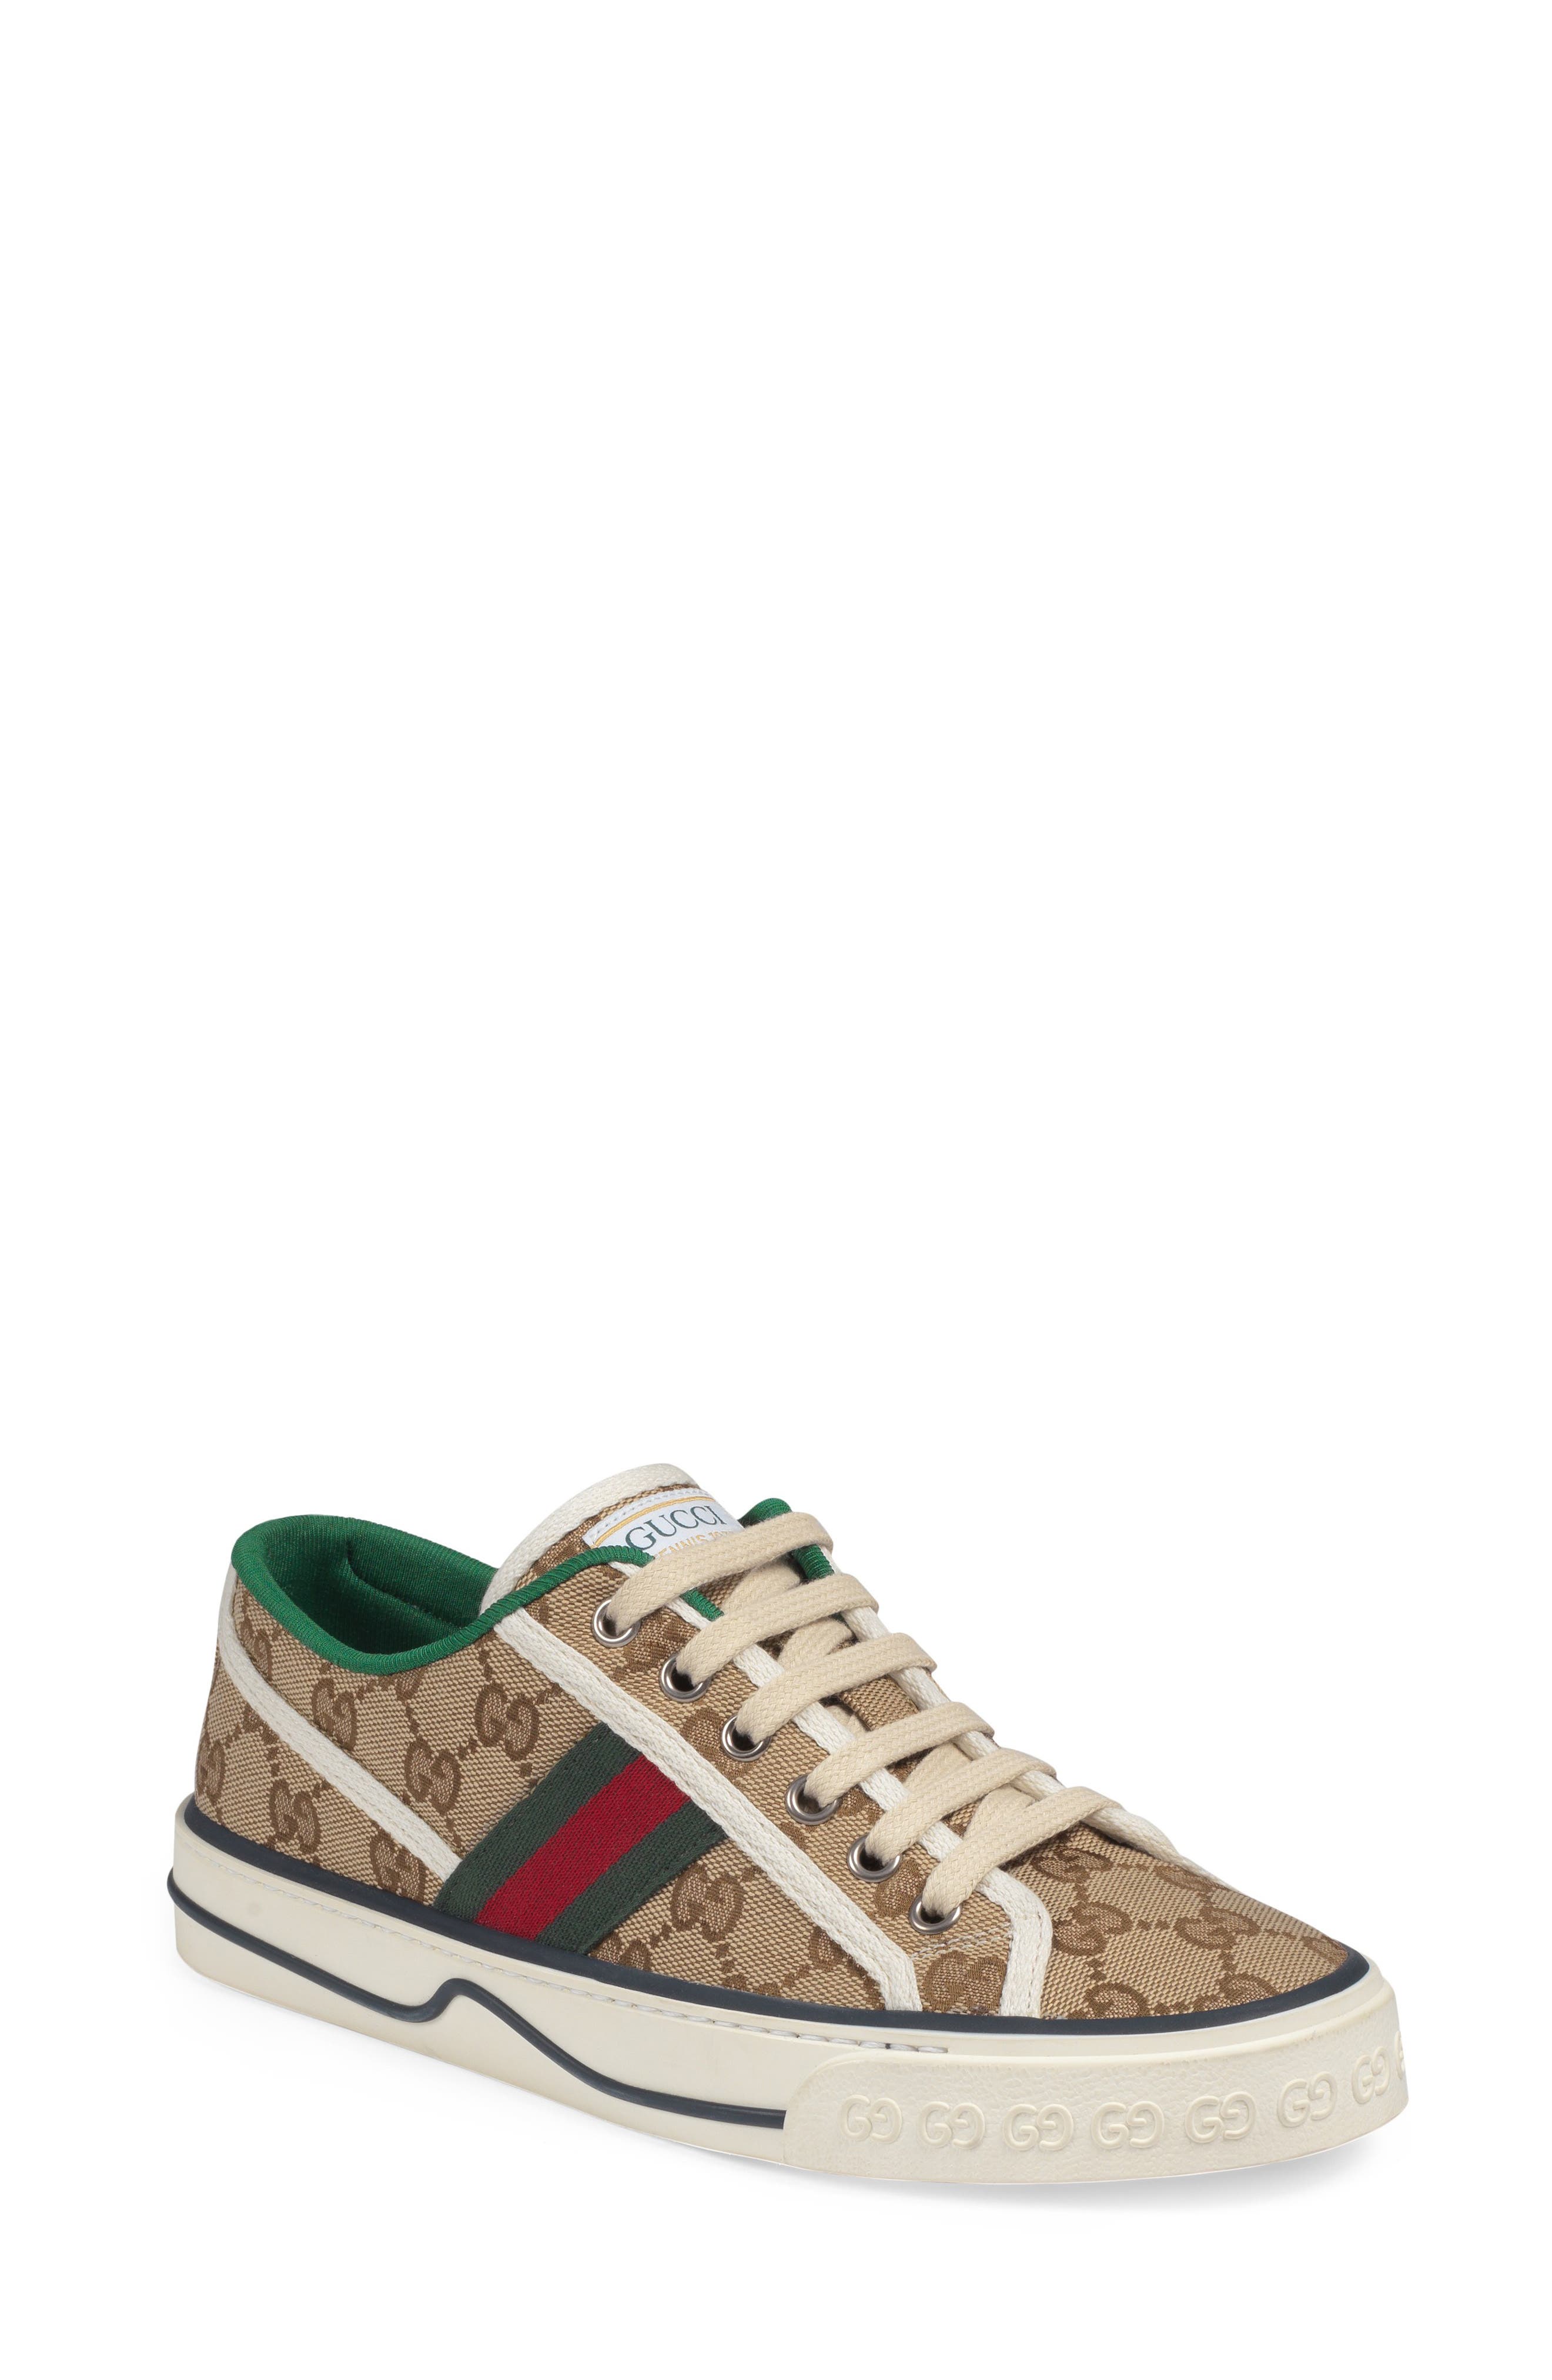 nordstrom gucci shoes